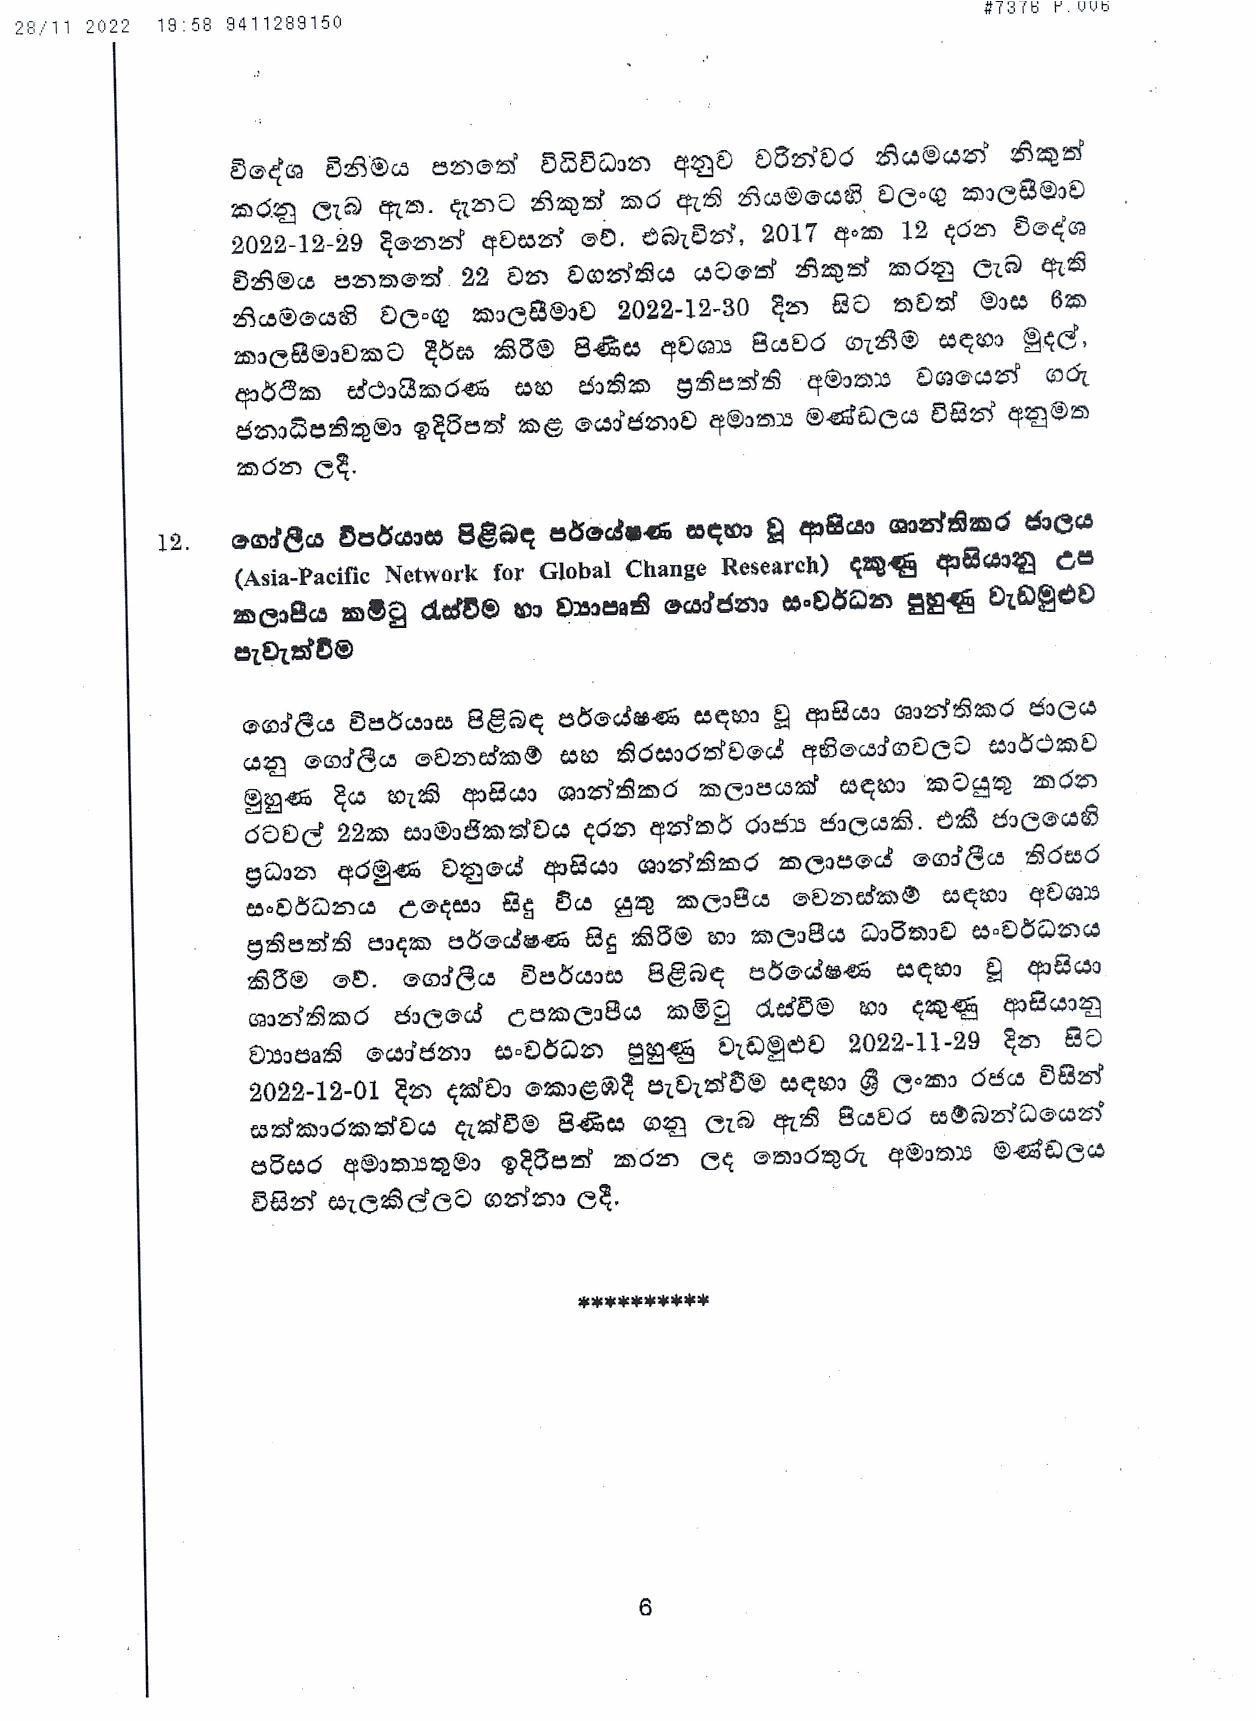 Cabinet Decision on 28.11.2022 page 006